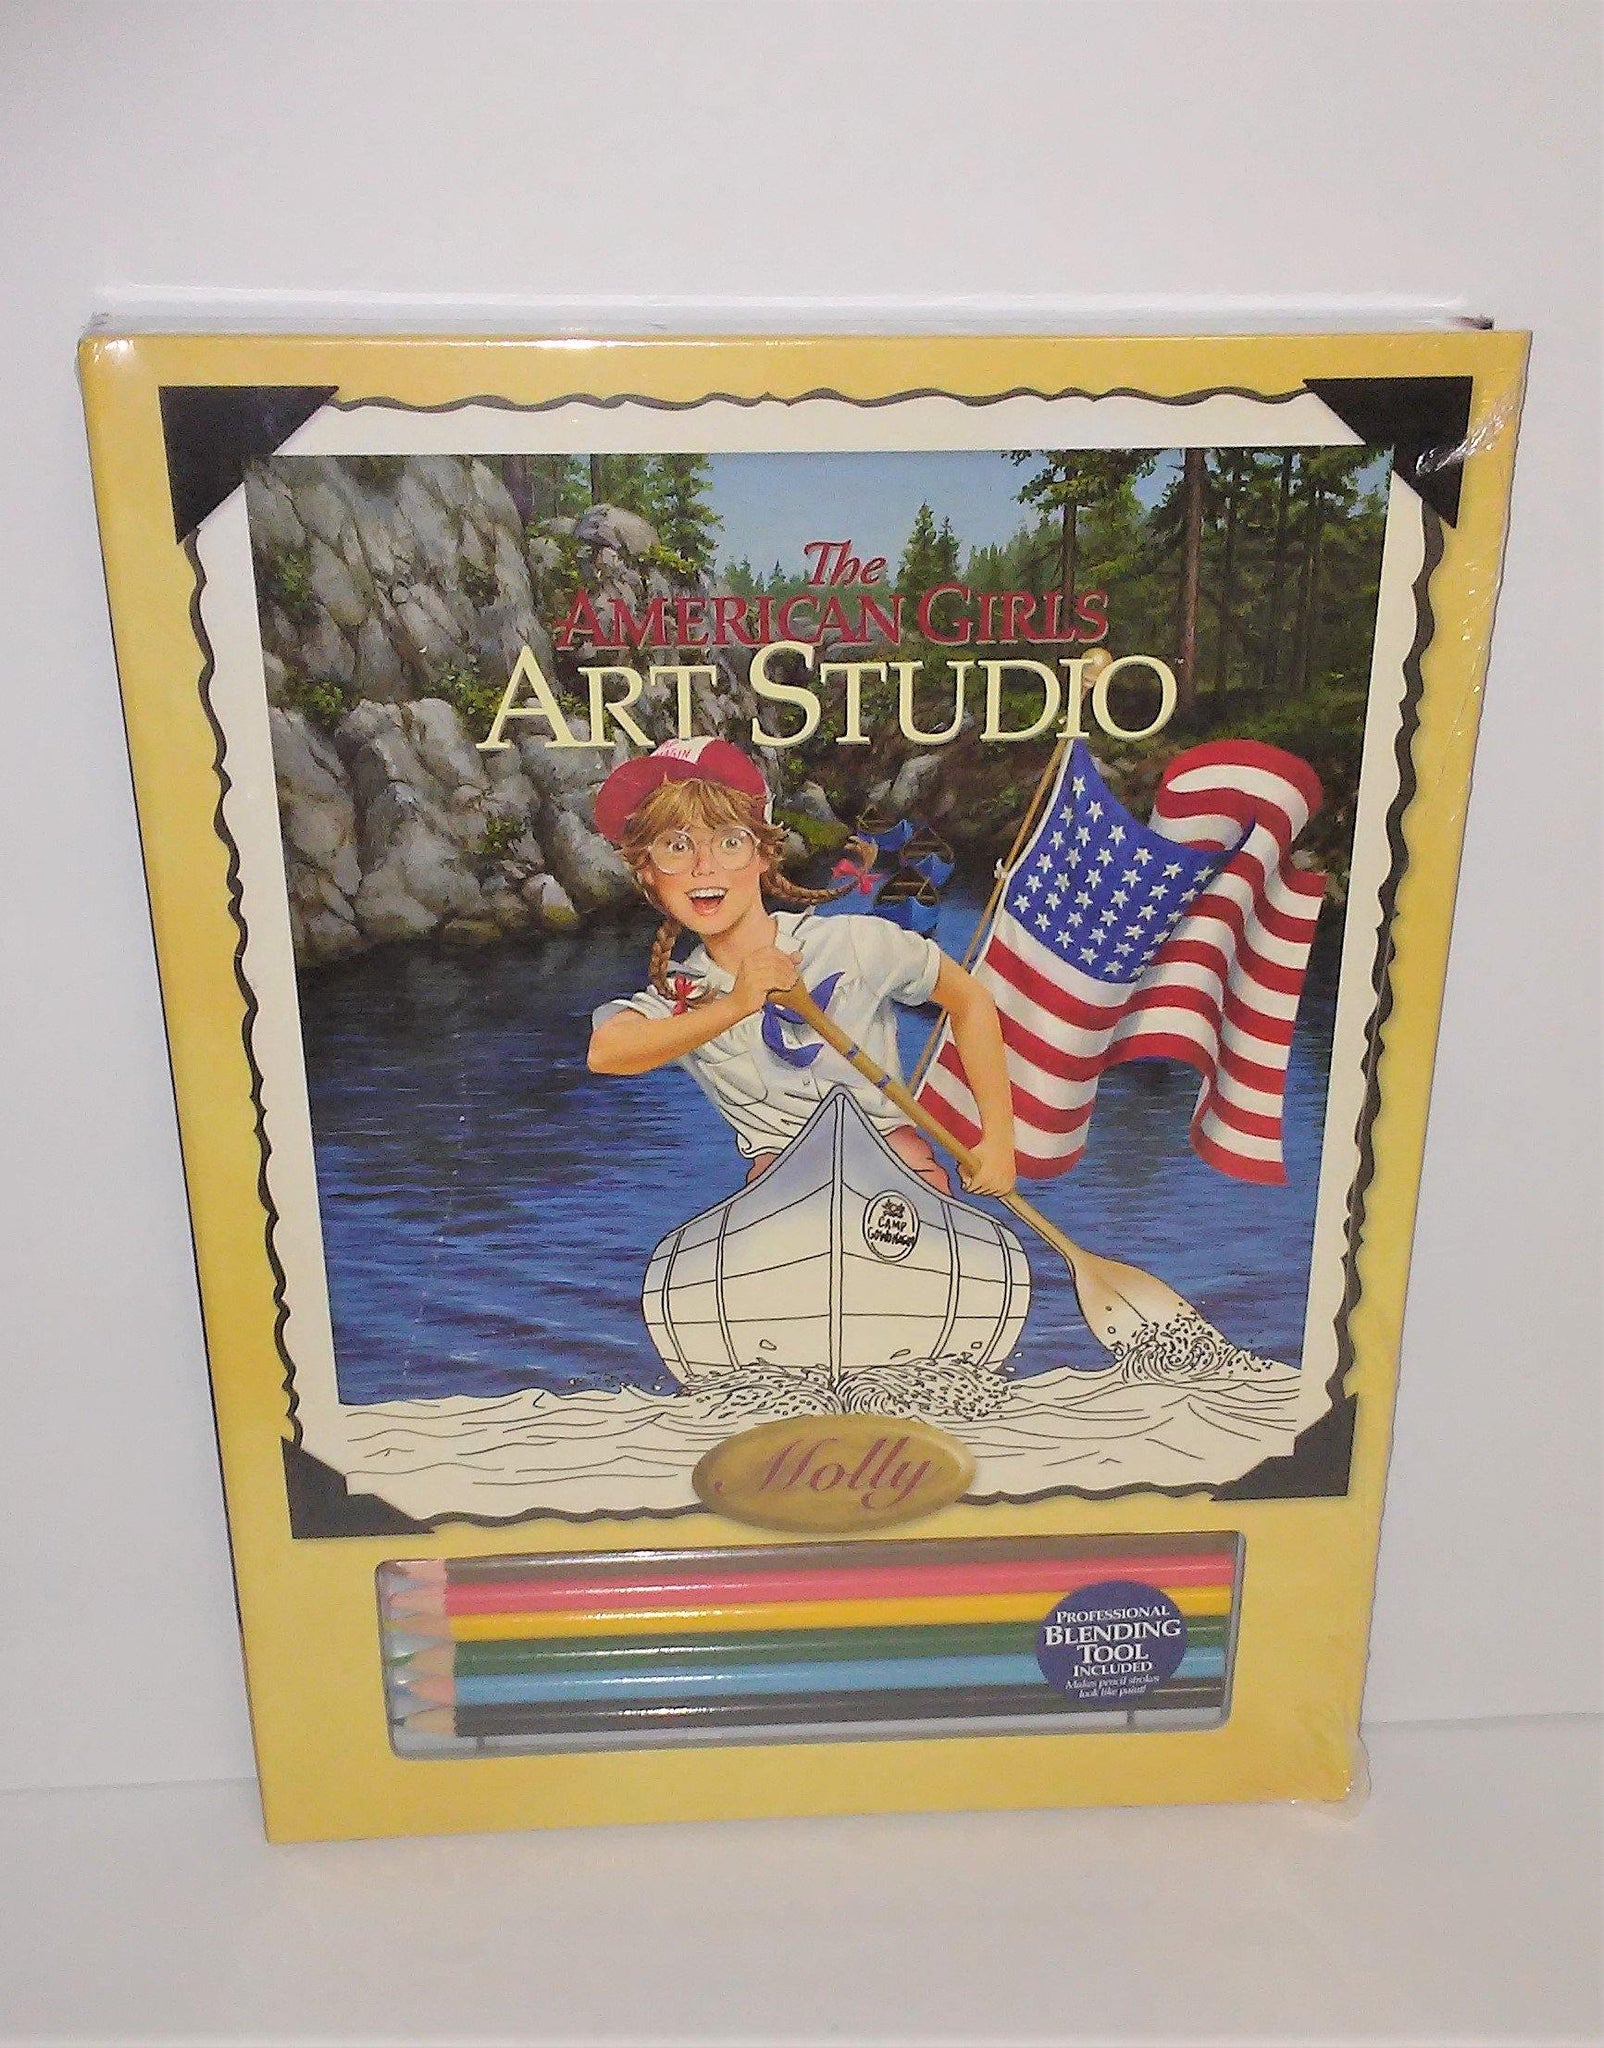 The American Girls ART STUDIO Set MOLLY KIT with Professional